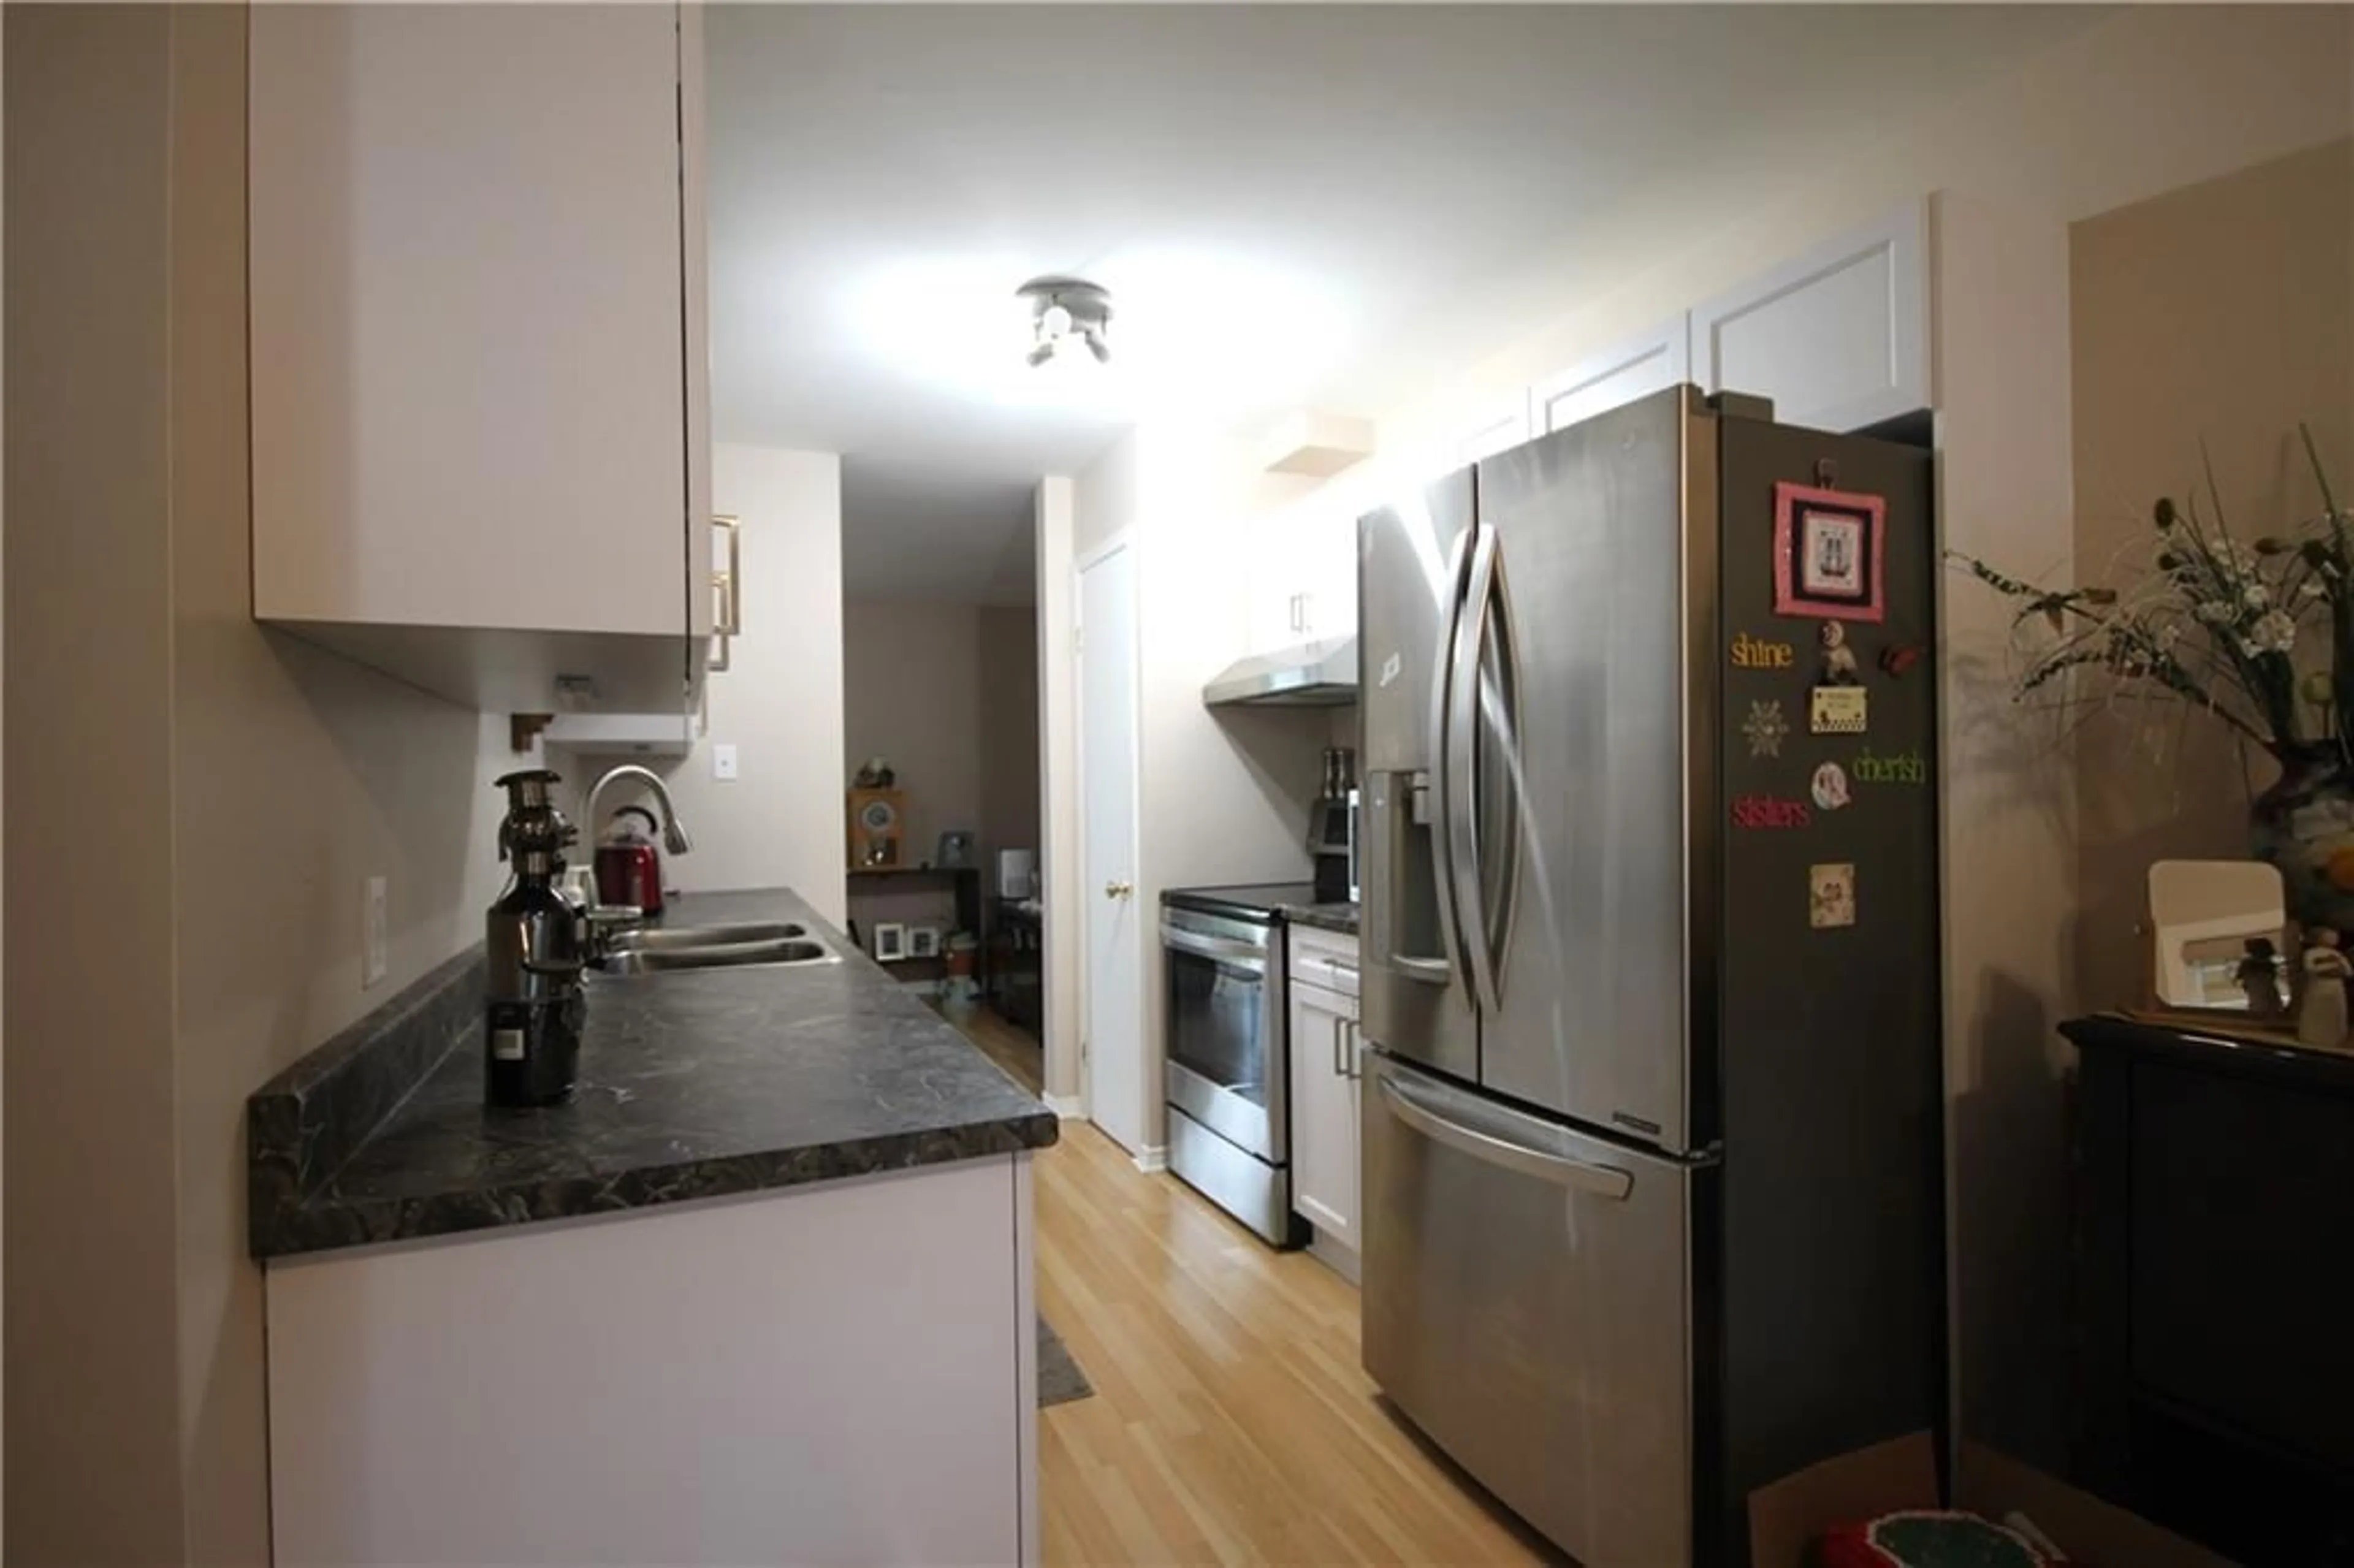 Standard kitchen for 213 LEMAY St, Cornwall Ontario K6H 3C2